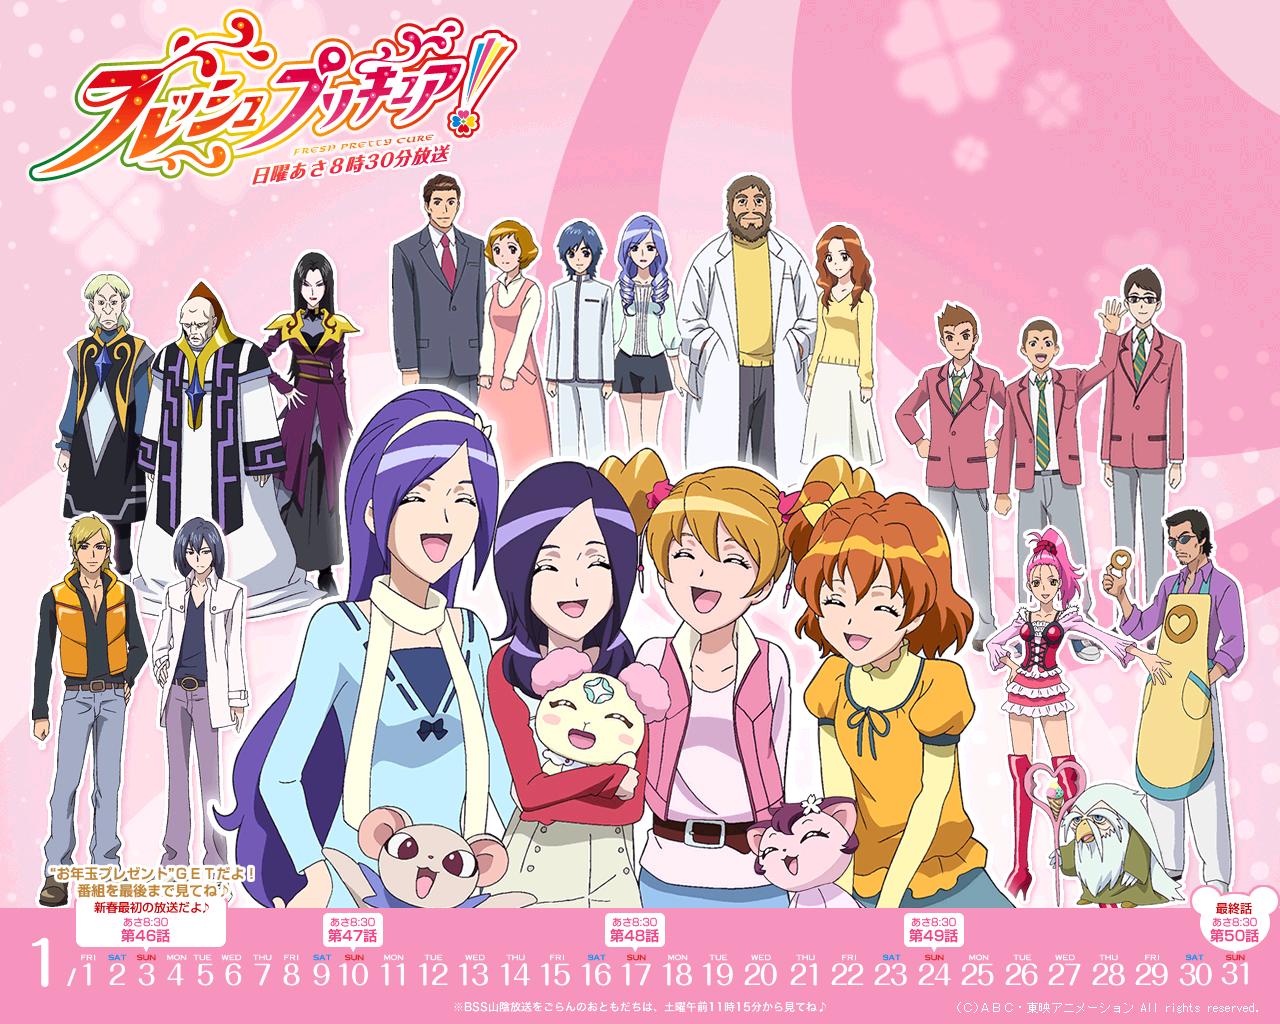 Nice Images Collection: Fresh Precure! Desktop Wallpapers